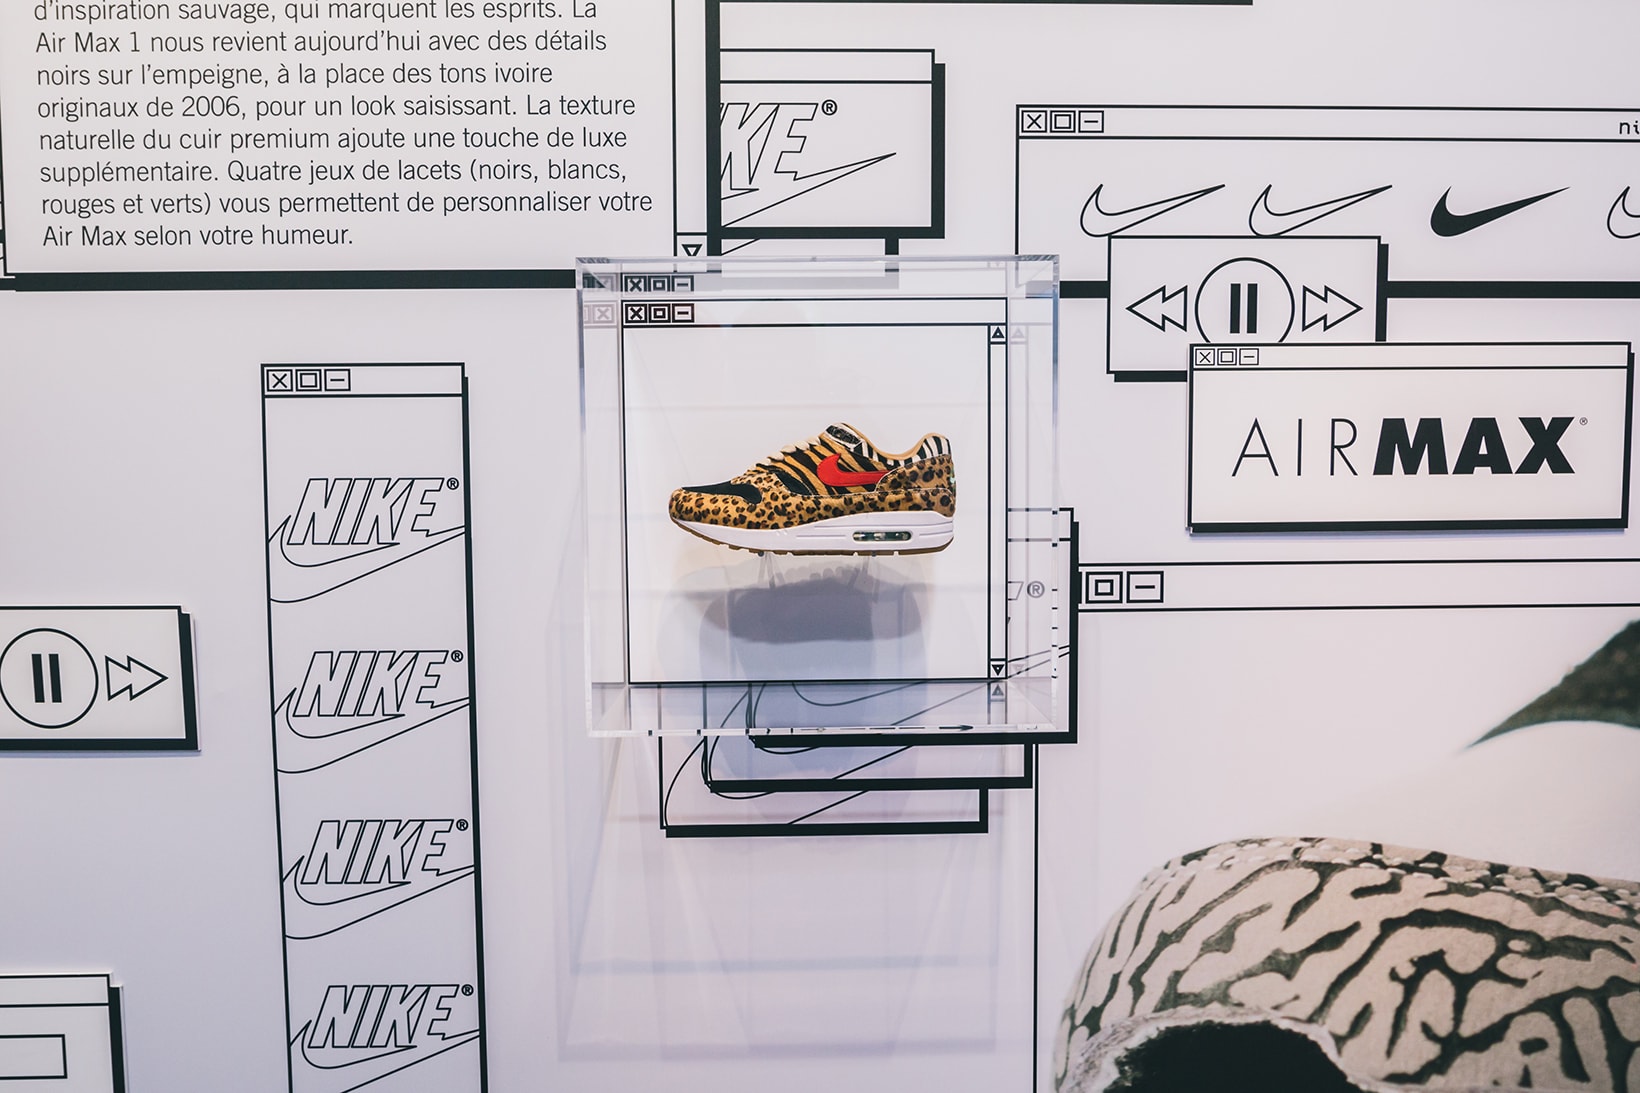 Nike "Paris On Air" Event Redesign Nike Air Max Gallery Caroline Fullerton Courtney Daily Marie Odinot